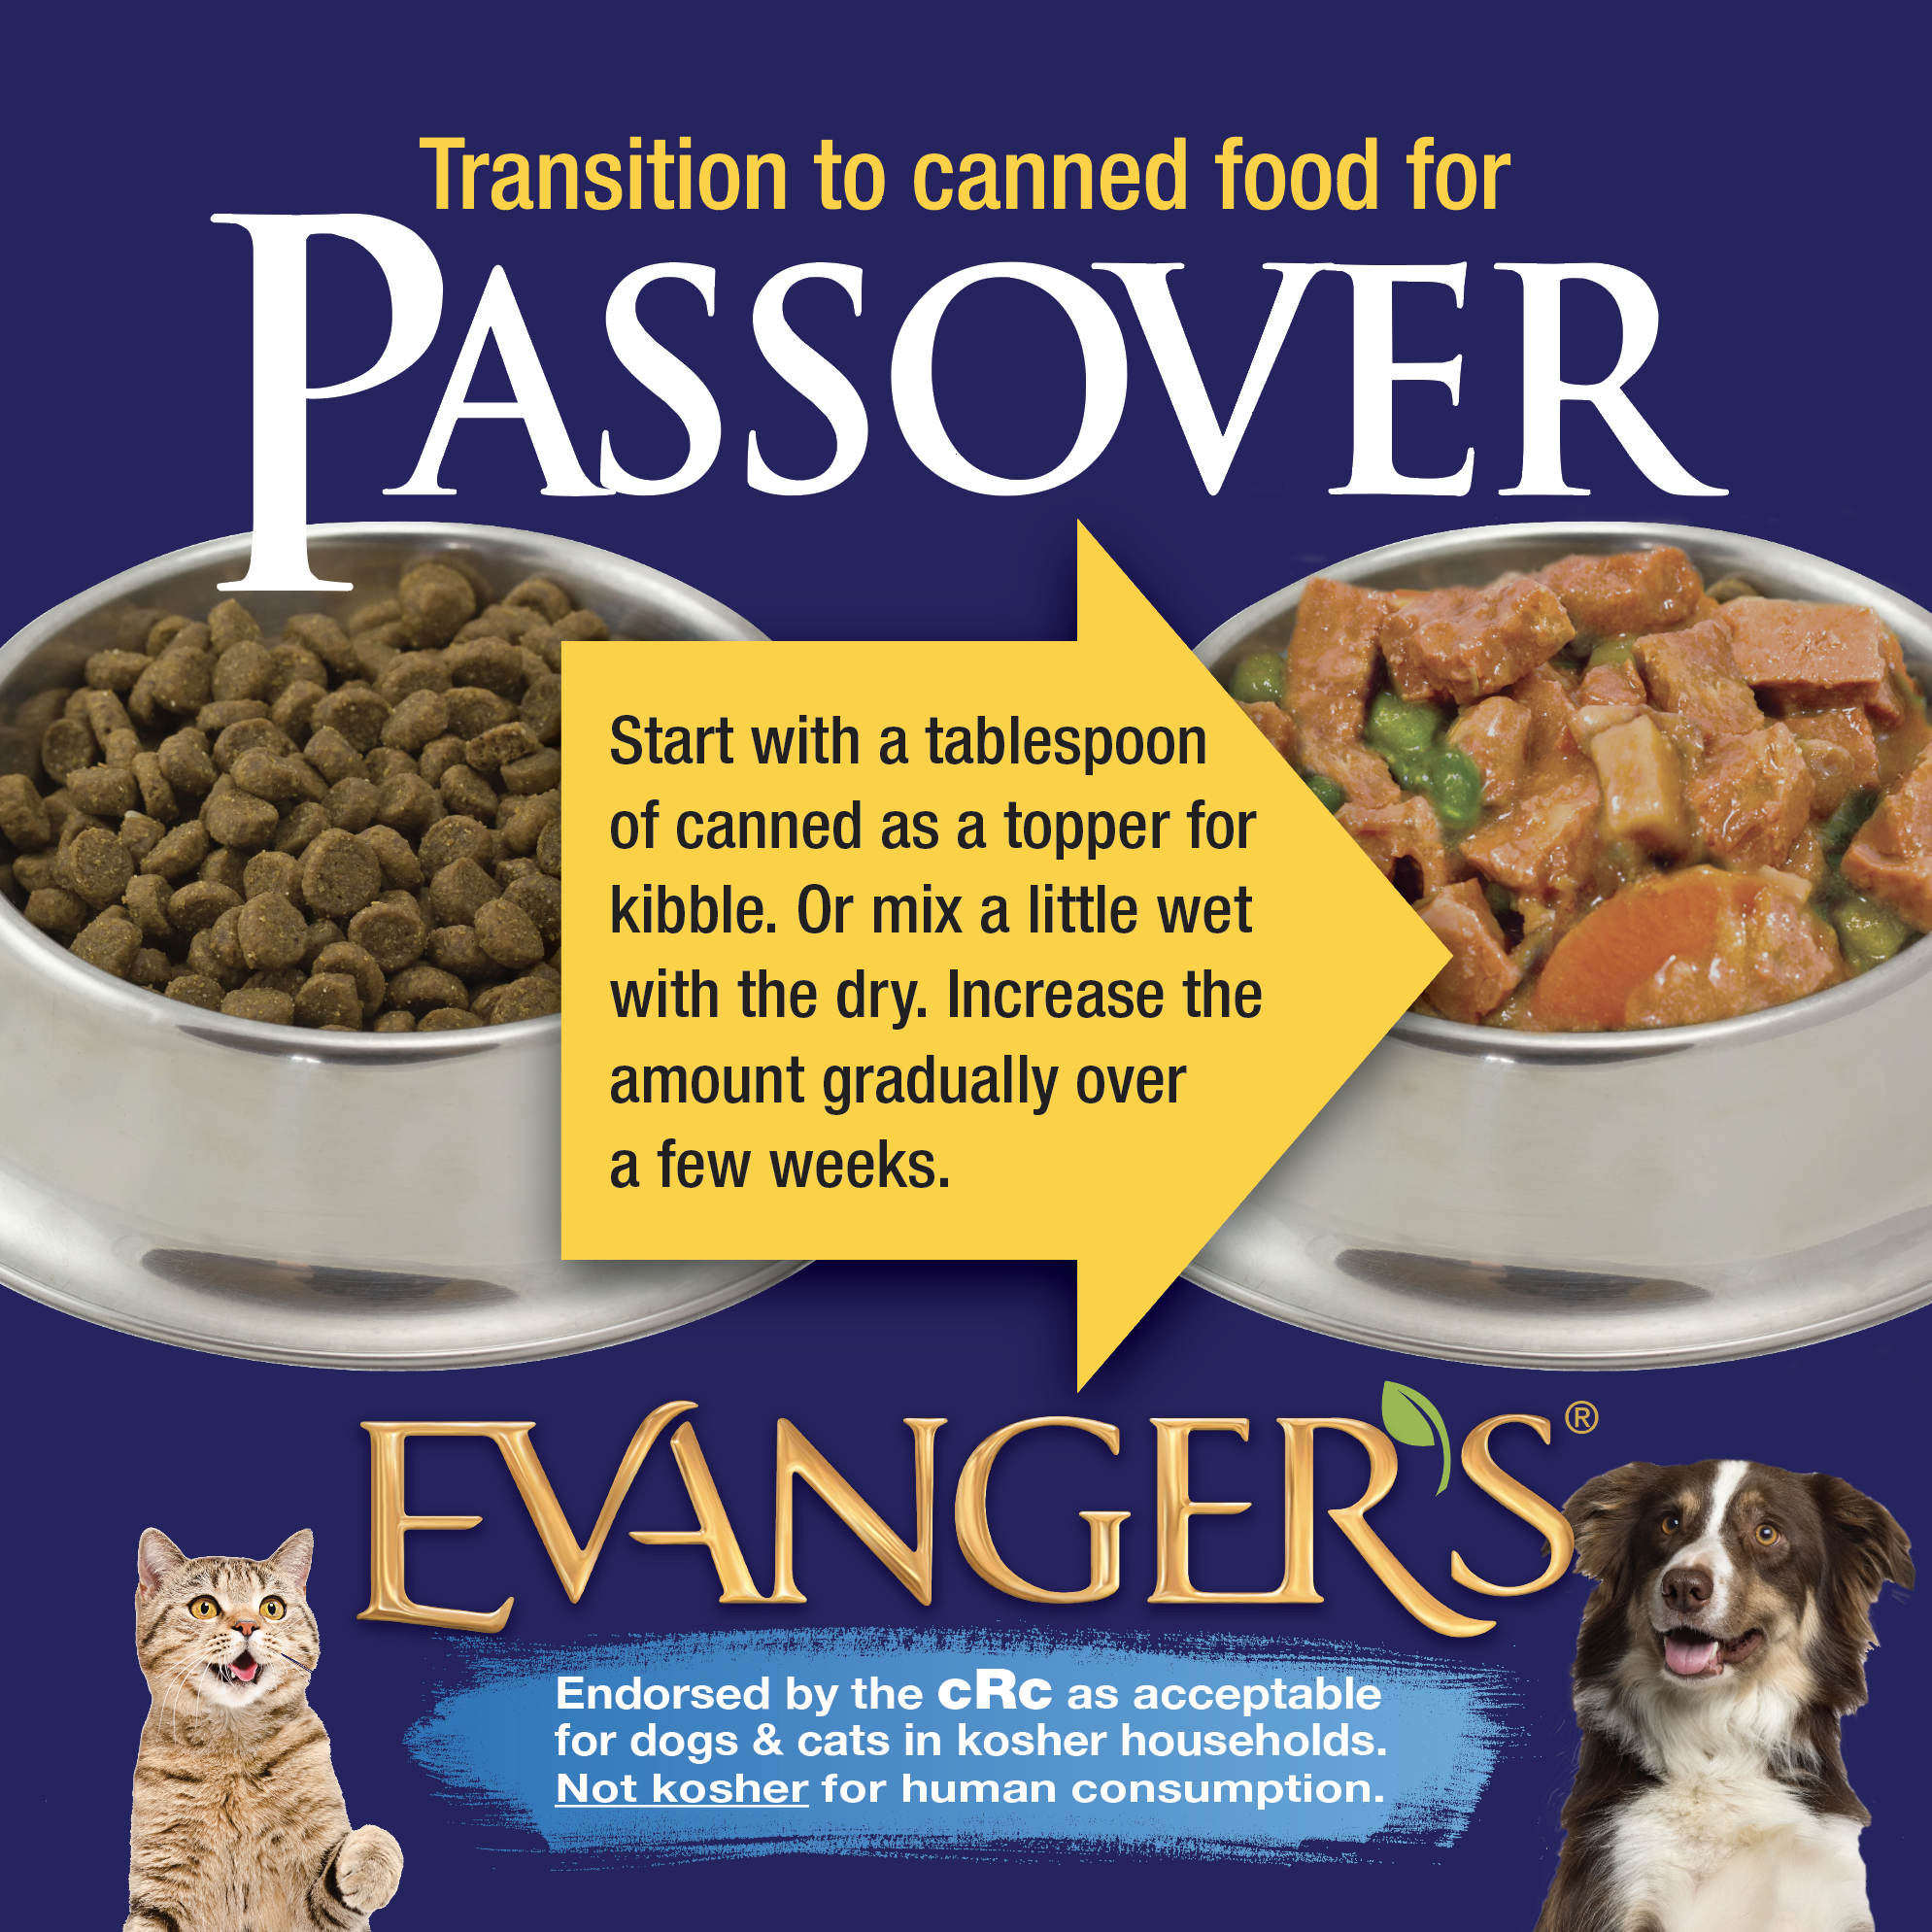 How to Prepare your Dog or Cat for Passover